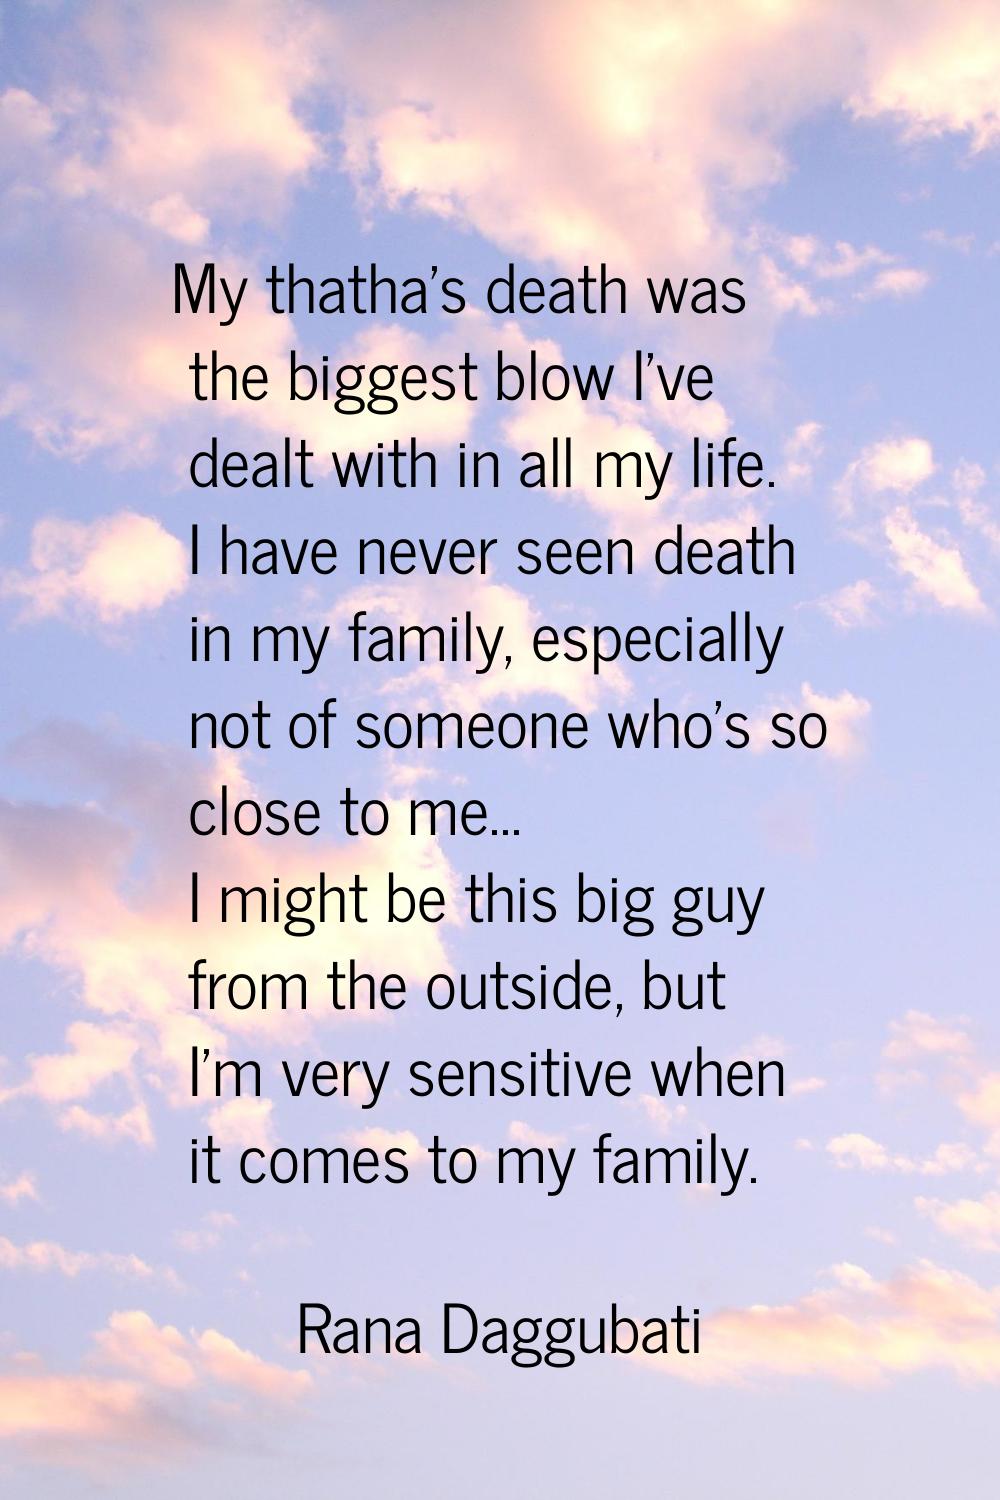 My thatha's death was the biggest blow I've dealt with in all my life. I have never seen death in m